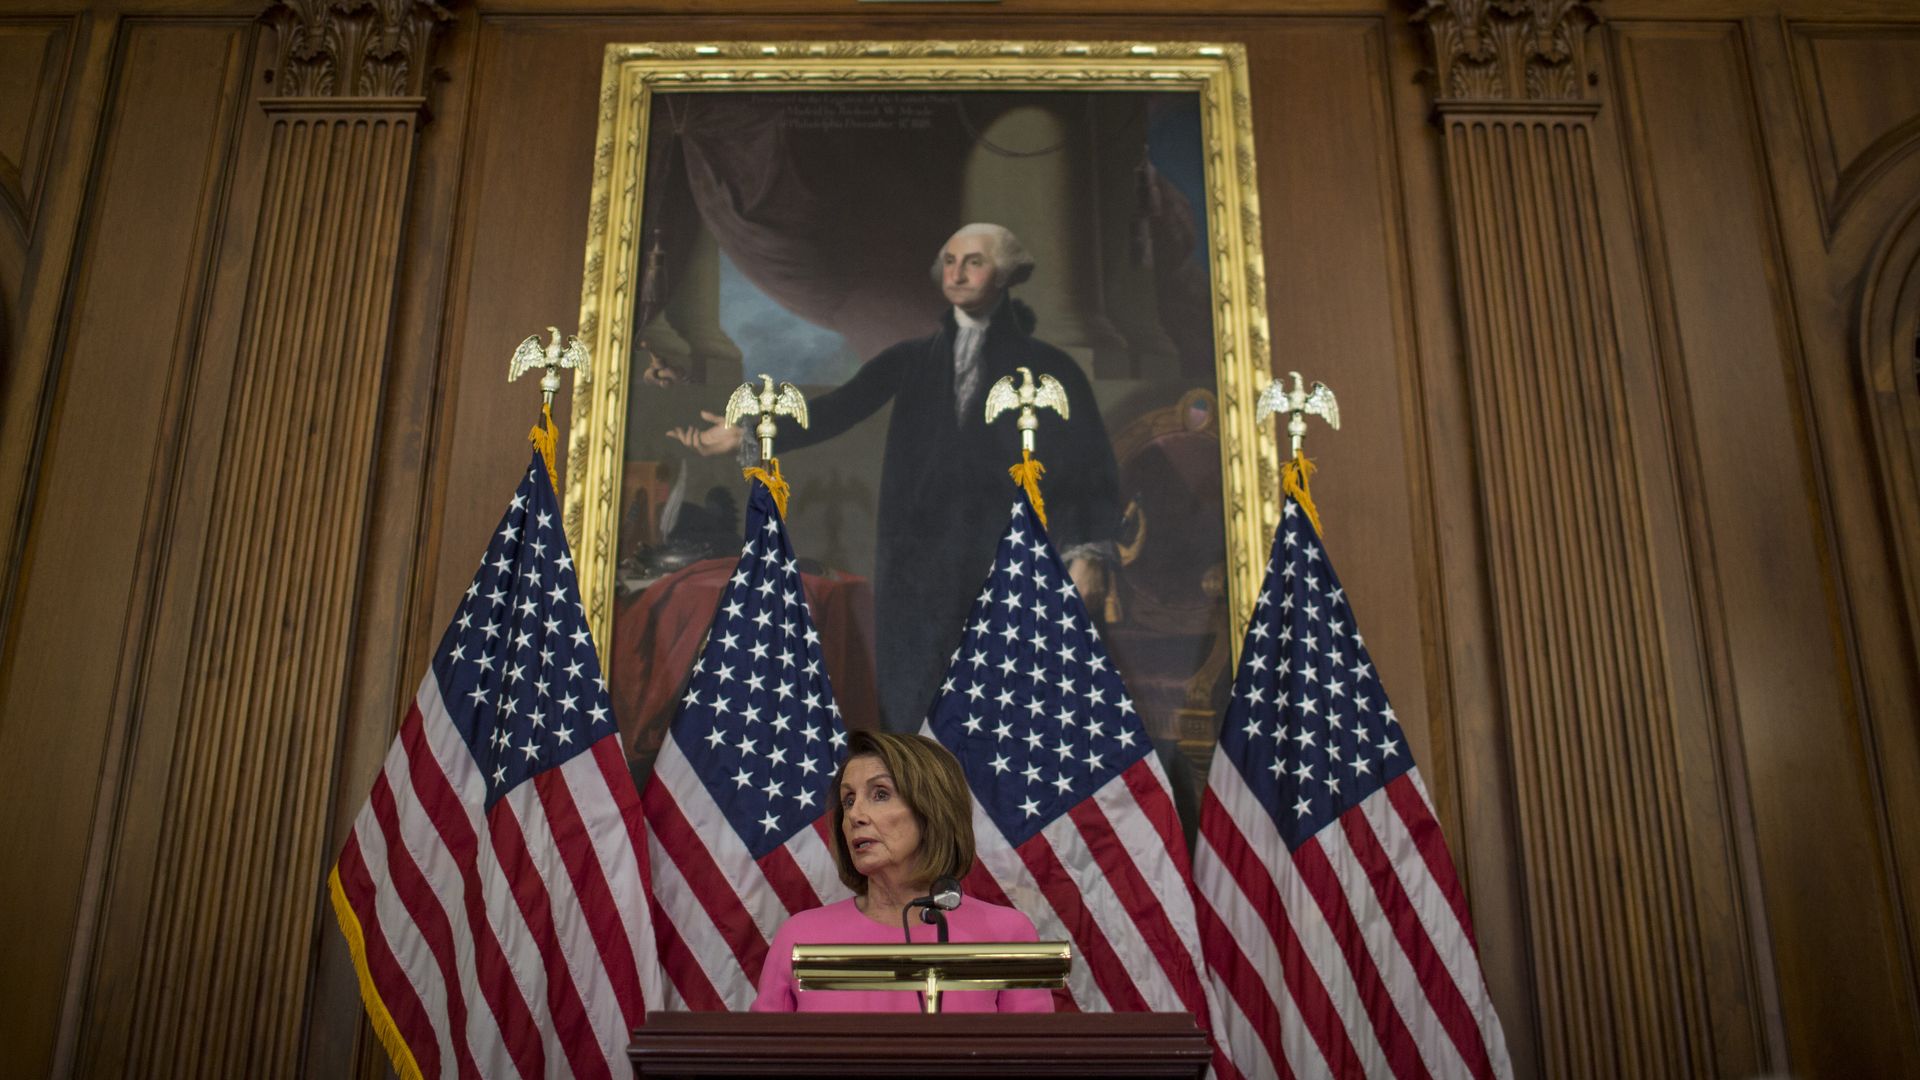 Nancy Pelosi standing in front of a portrait of George Washington